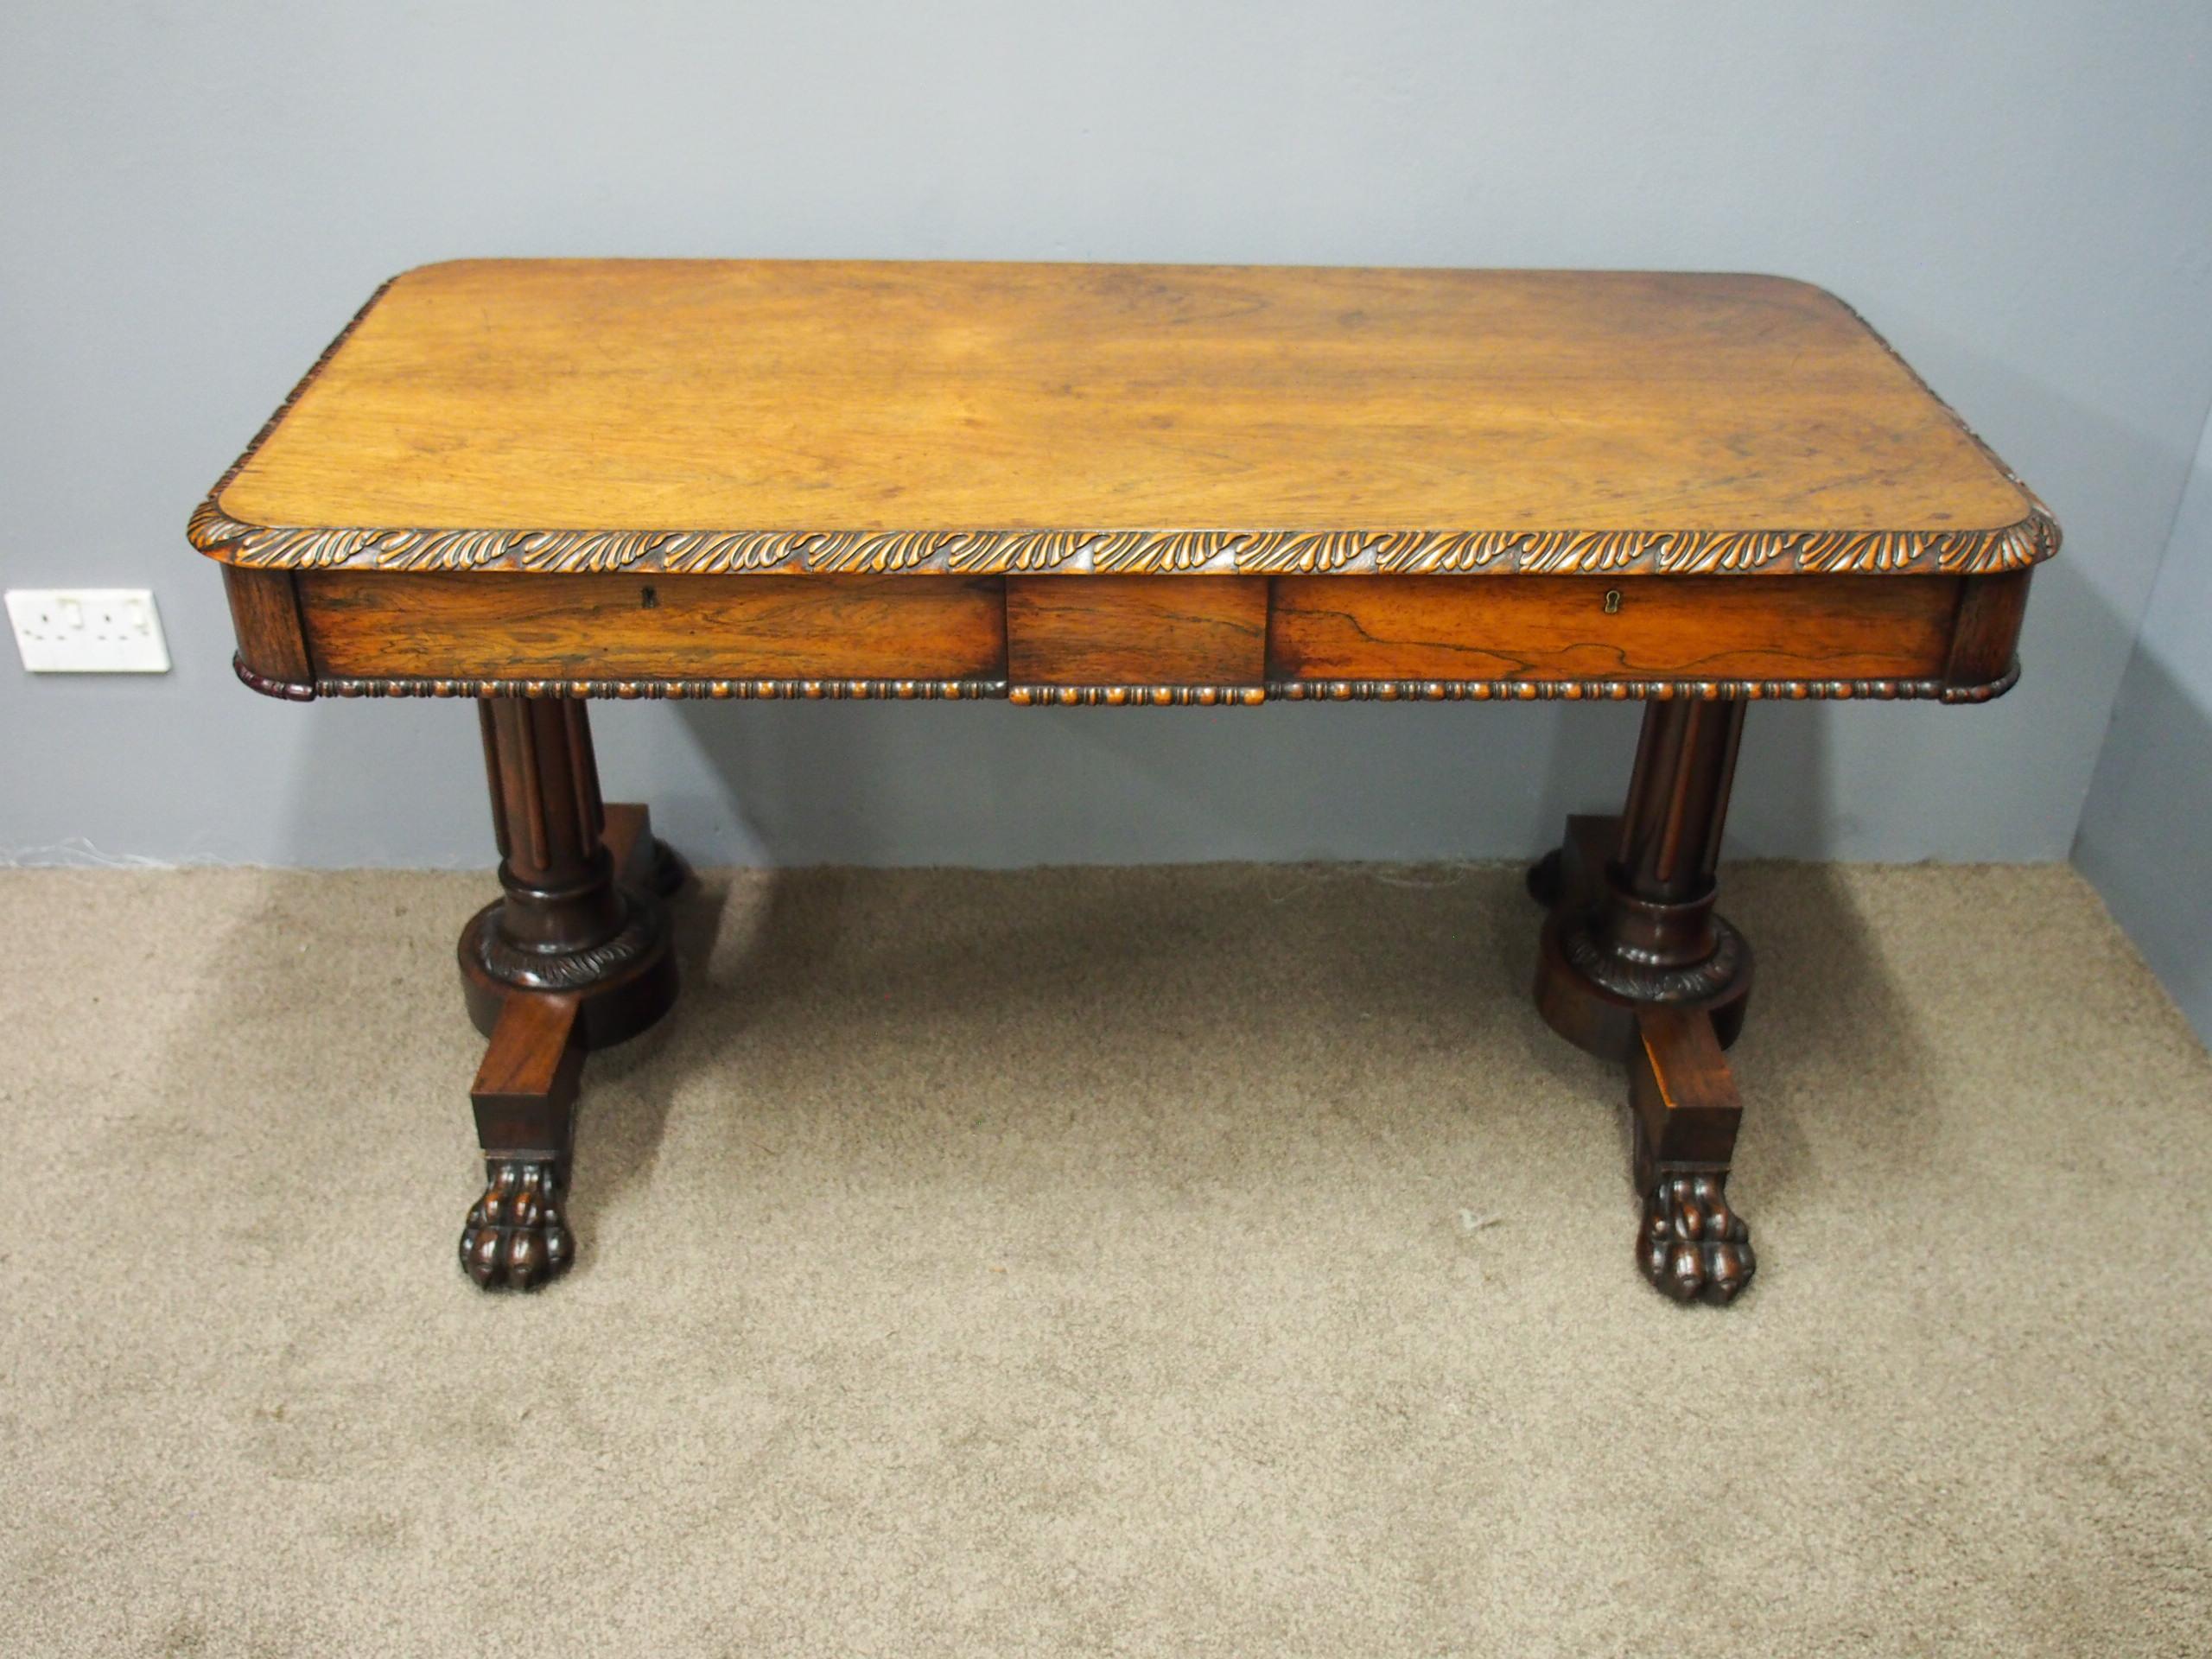 Exhibition quality rosewood library table of the William IV period, circa 1830. The rectangular shaped table has a profusely carved, gadrooned edge which continues on all sides. The front frieze has two drawers, and there are dummy drawers to the